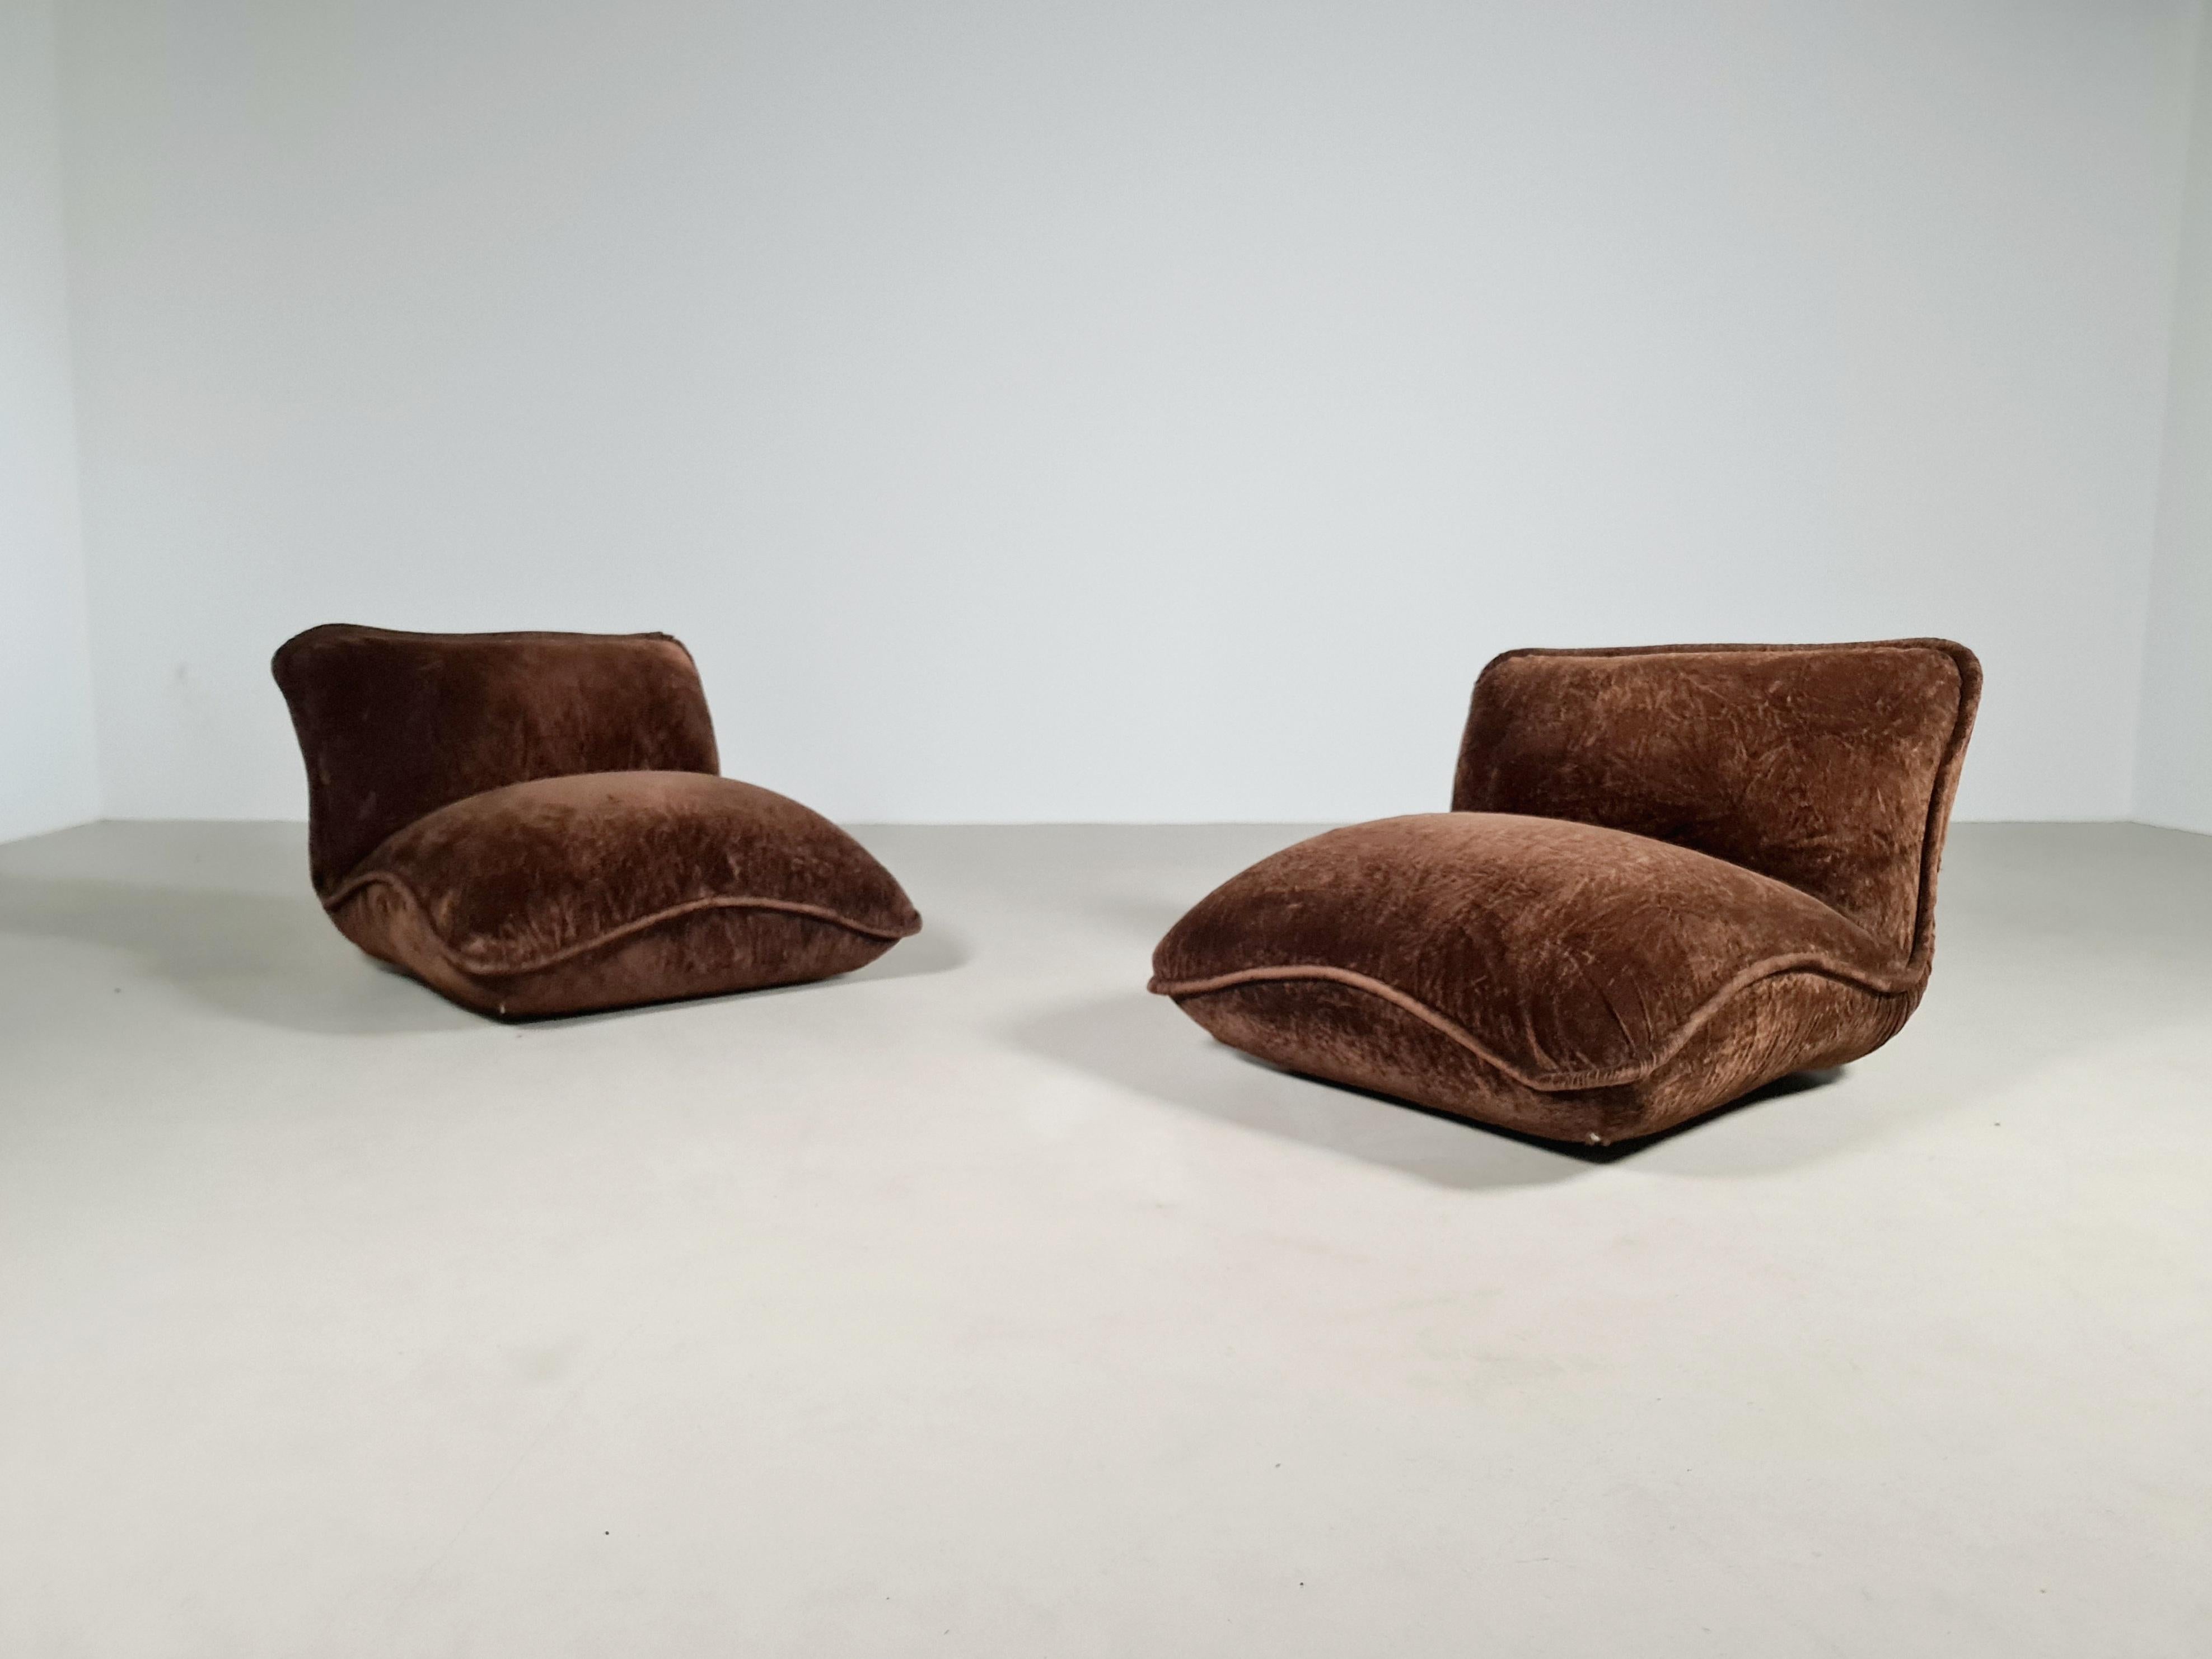 Rare pair of model ‘Gena’ lounge chairs designed by Claudio Vagnoni for 1P Italy in 1969. The two frames are manufactured with metal and wood. Original fabric. With a mark of the maker. A true collector's item.